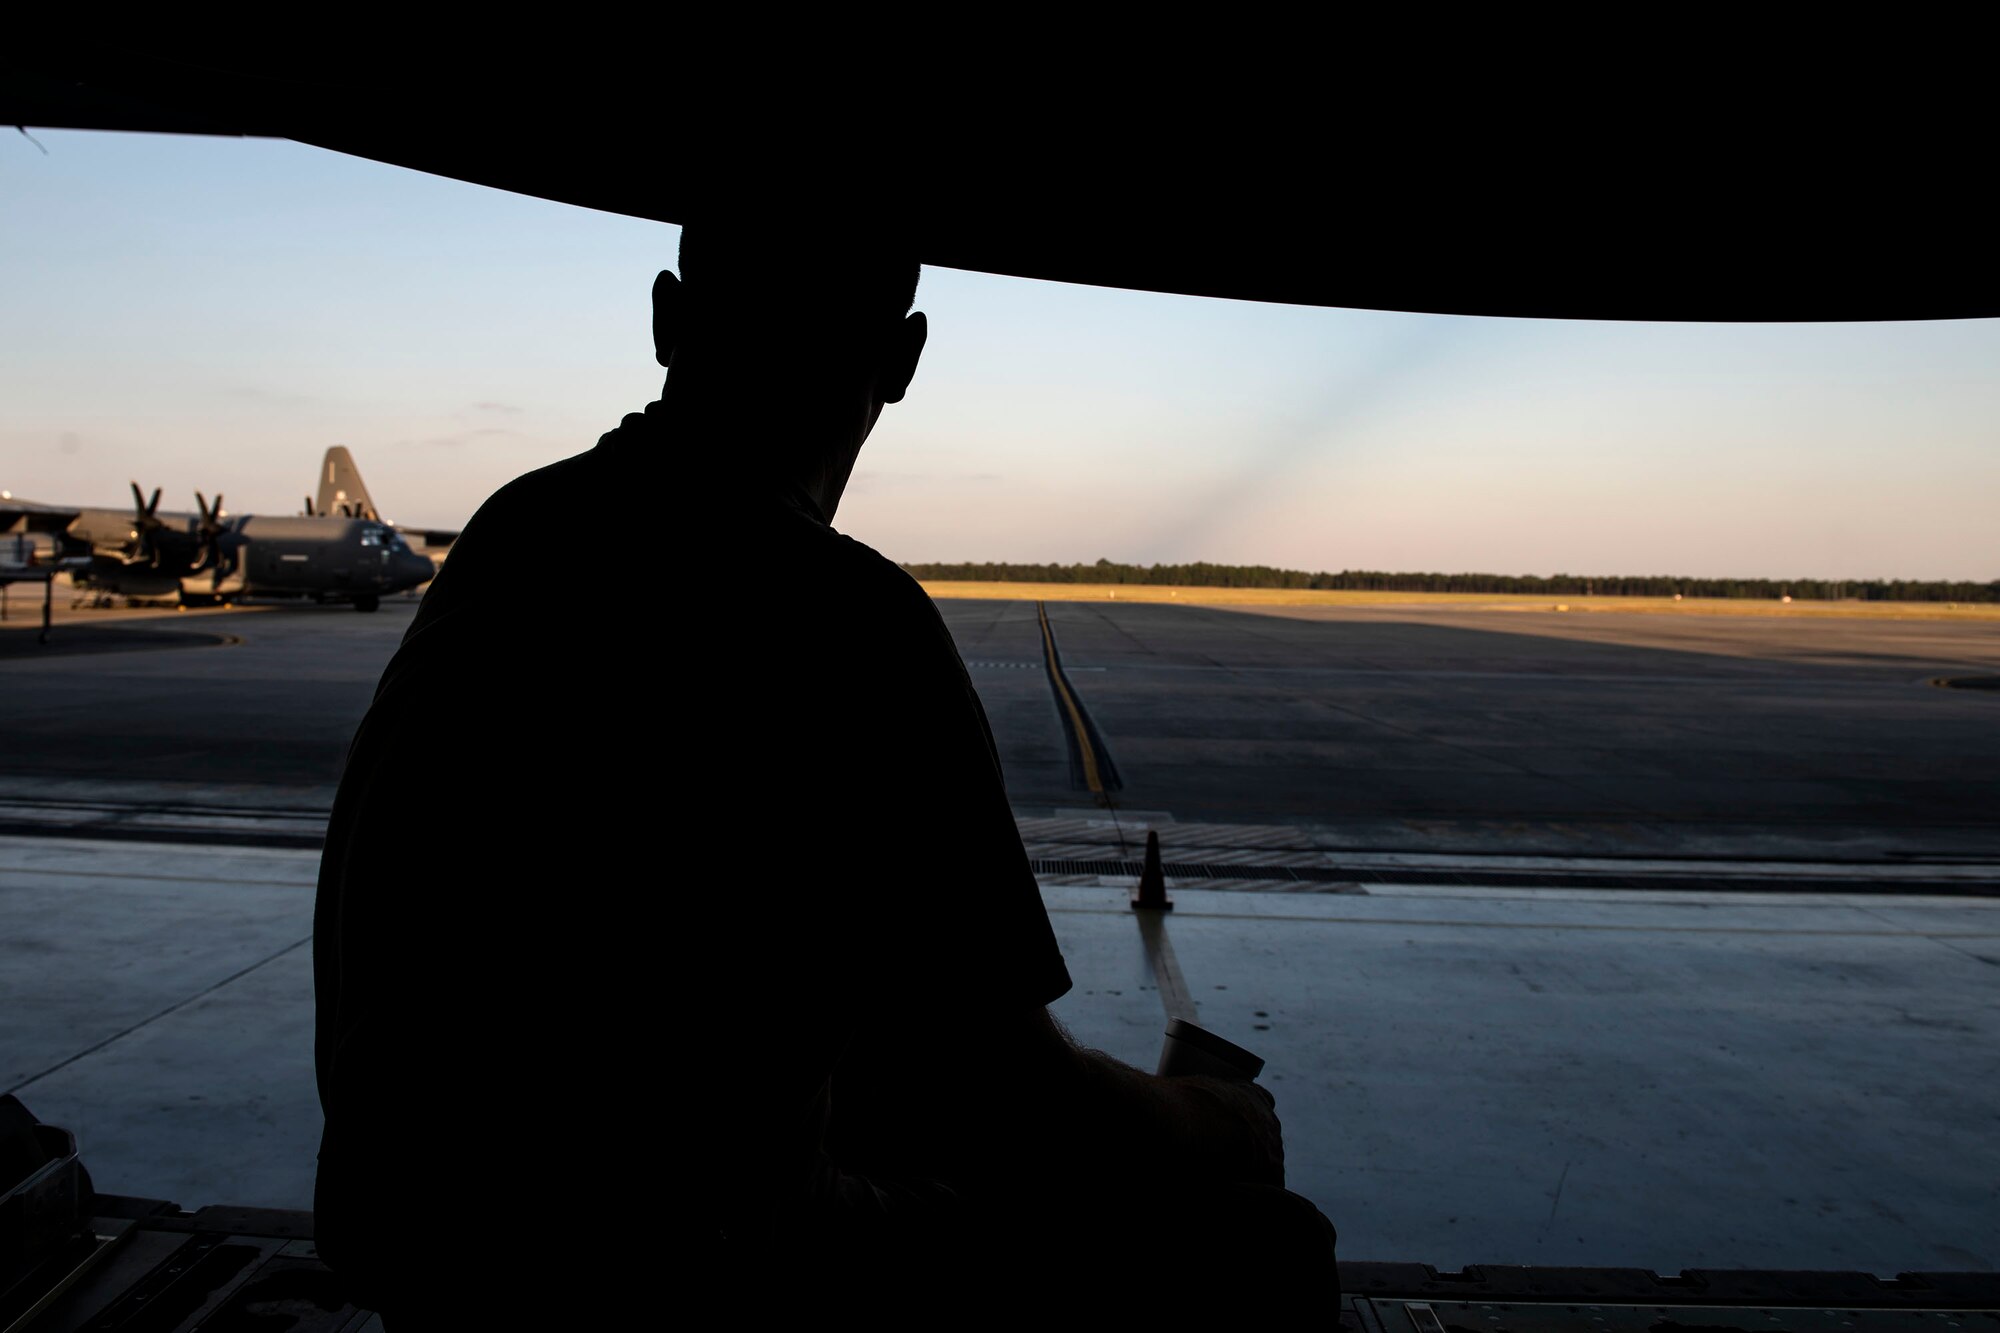 Tech. Sgt. Phillip Horton, 71st Aircraft Maintenance Unit crew chief, looks out onto the flightline after removing cargo floor panels during preparation of an HC-130J Combat King II for a situational awareness communication upgrade (SACU) modification Sept. 25, 2019, at Moody Air Force Base, Ga. The panels are removed to allow access to the area inside the aircraft where the SACU will be installed. This SACU will enhance the aircraft’s ability to communicate with personnel on the ground during search and rescue operations. (U.S. Air Force photo by Senior Airman Erick Requadt)